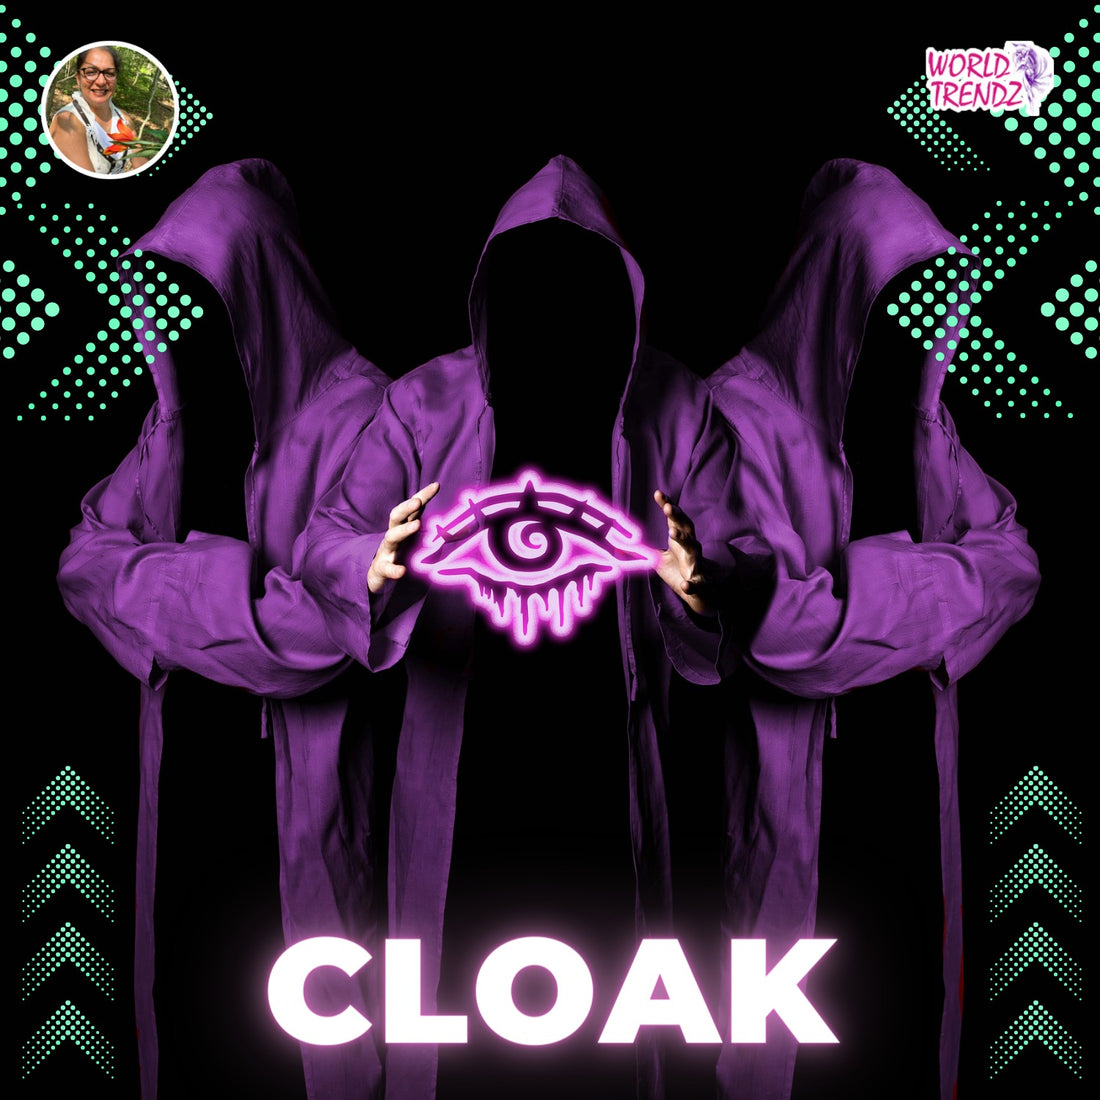 The Greatest Moments in Cloak History